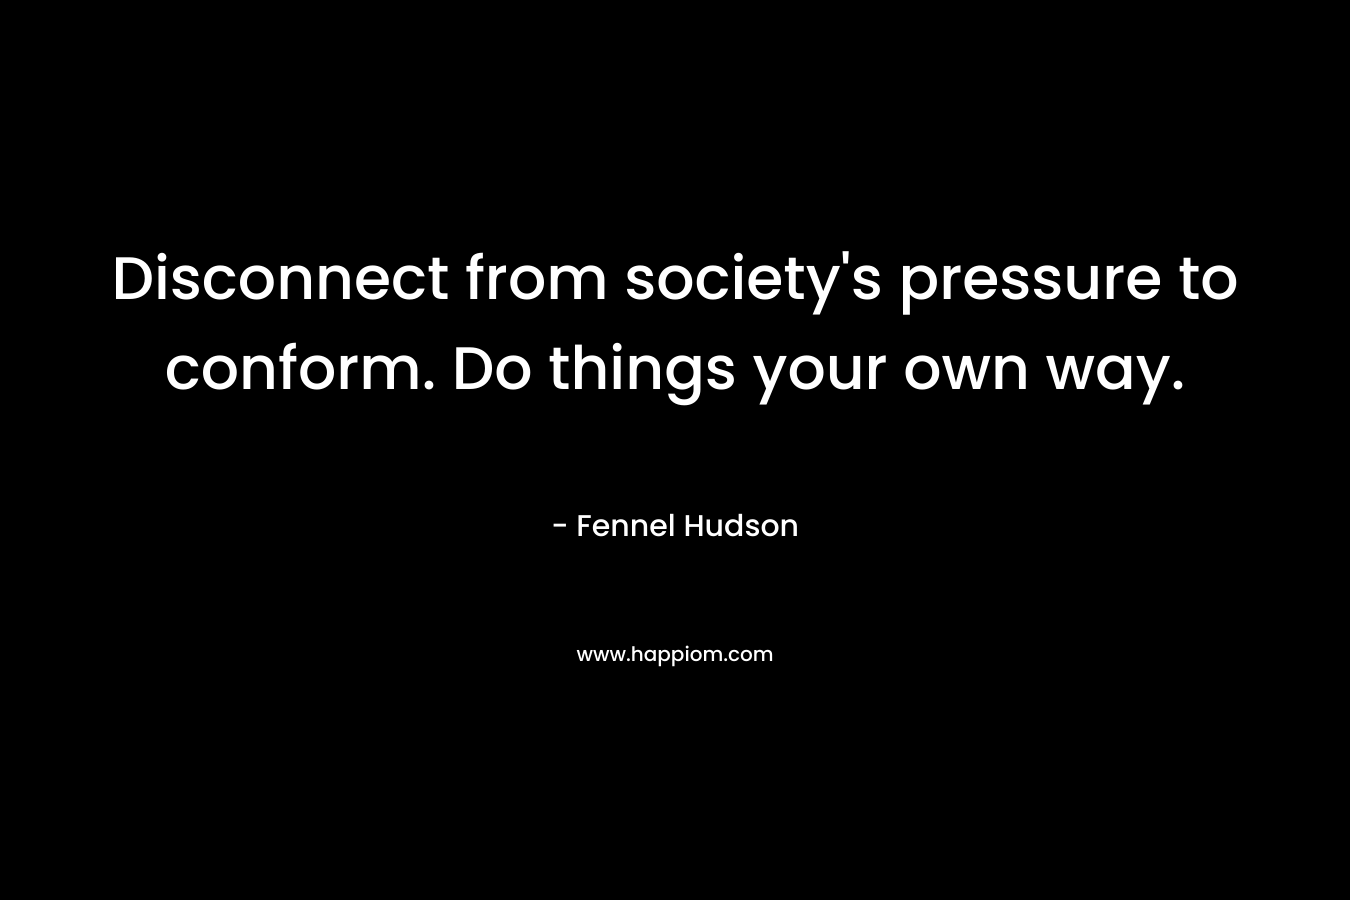 Disconnect from society’s pressure to conform. Do things your own way. – Fennel Hudson